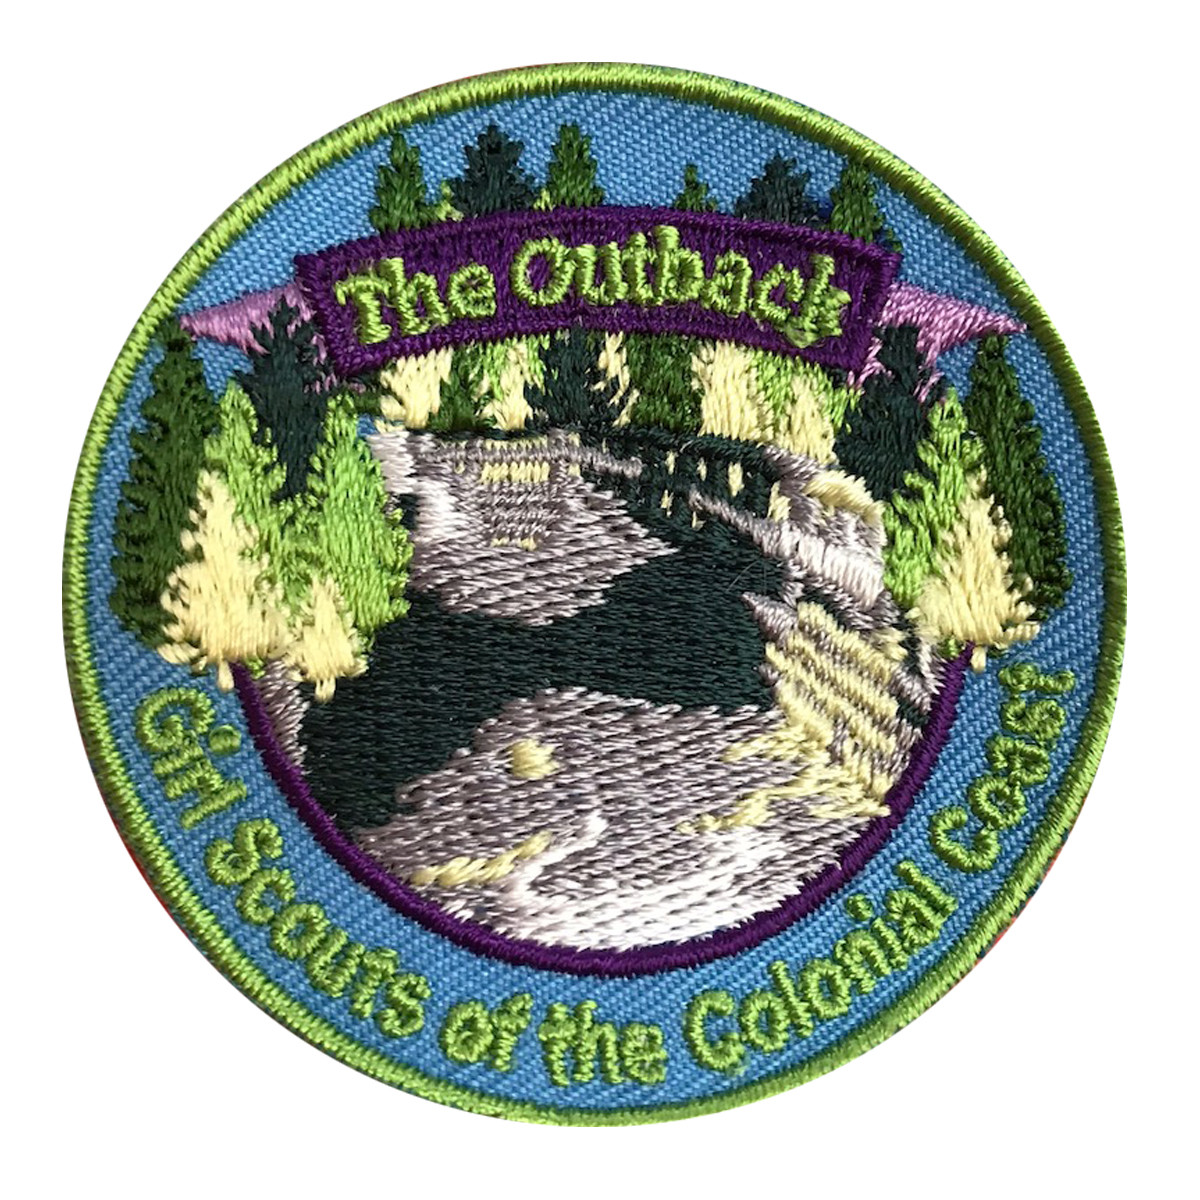 Camp Outback Patch